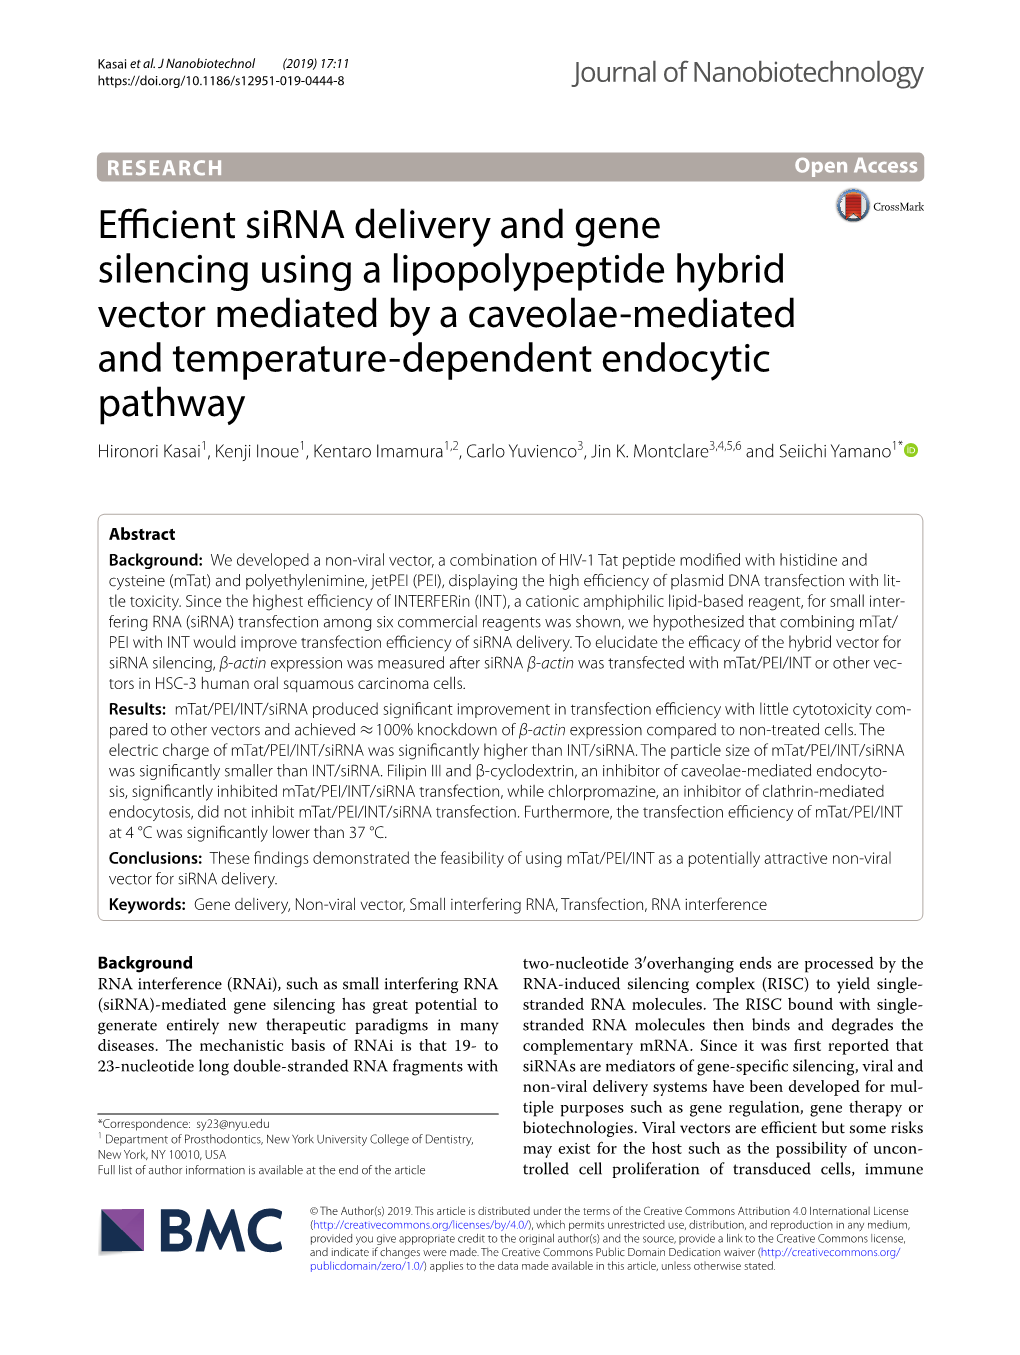 Efficient Sirna Delivery and Gene Silencing Using a Lipopolypeptide Hybrid Vector Mediated by a Caveolae-Mediated and Temperatur